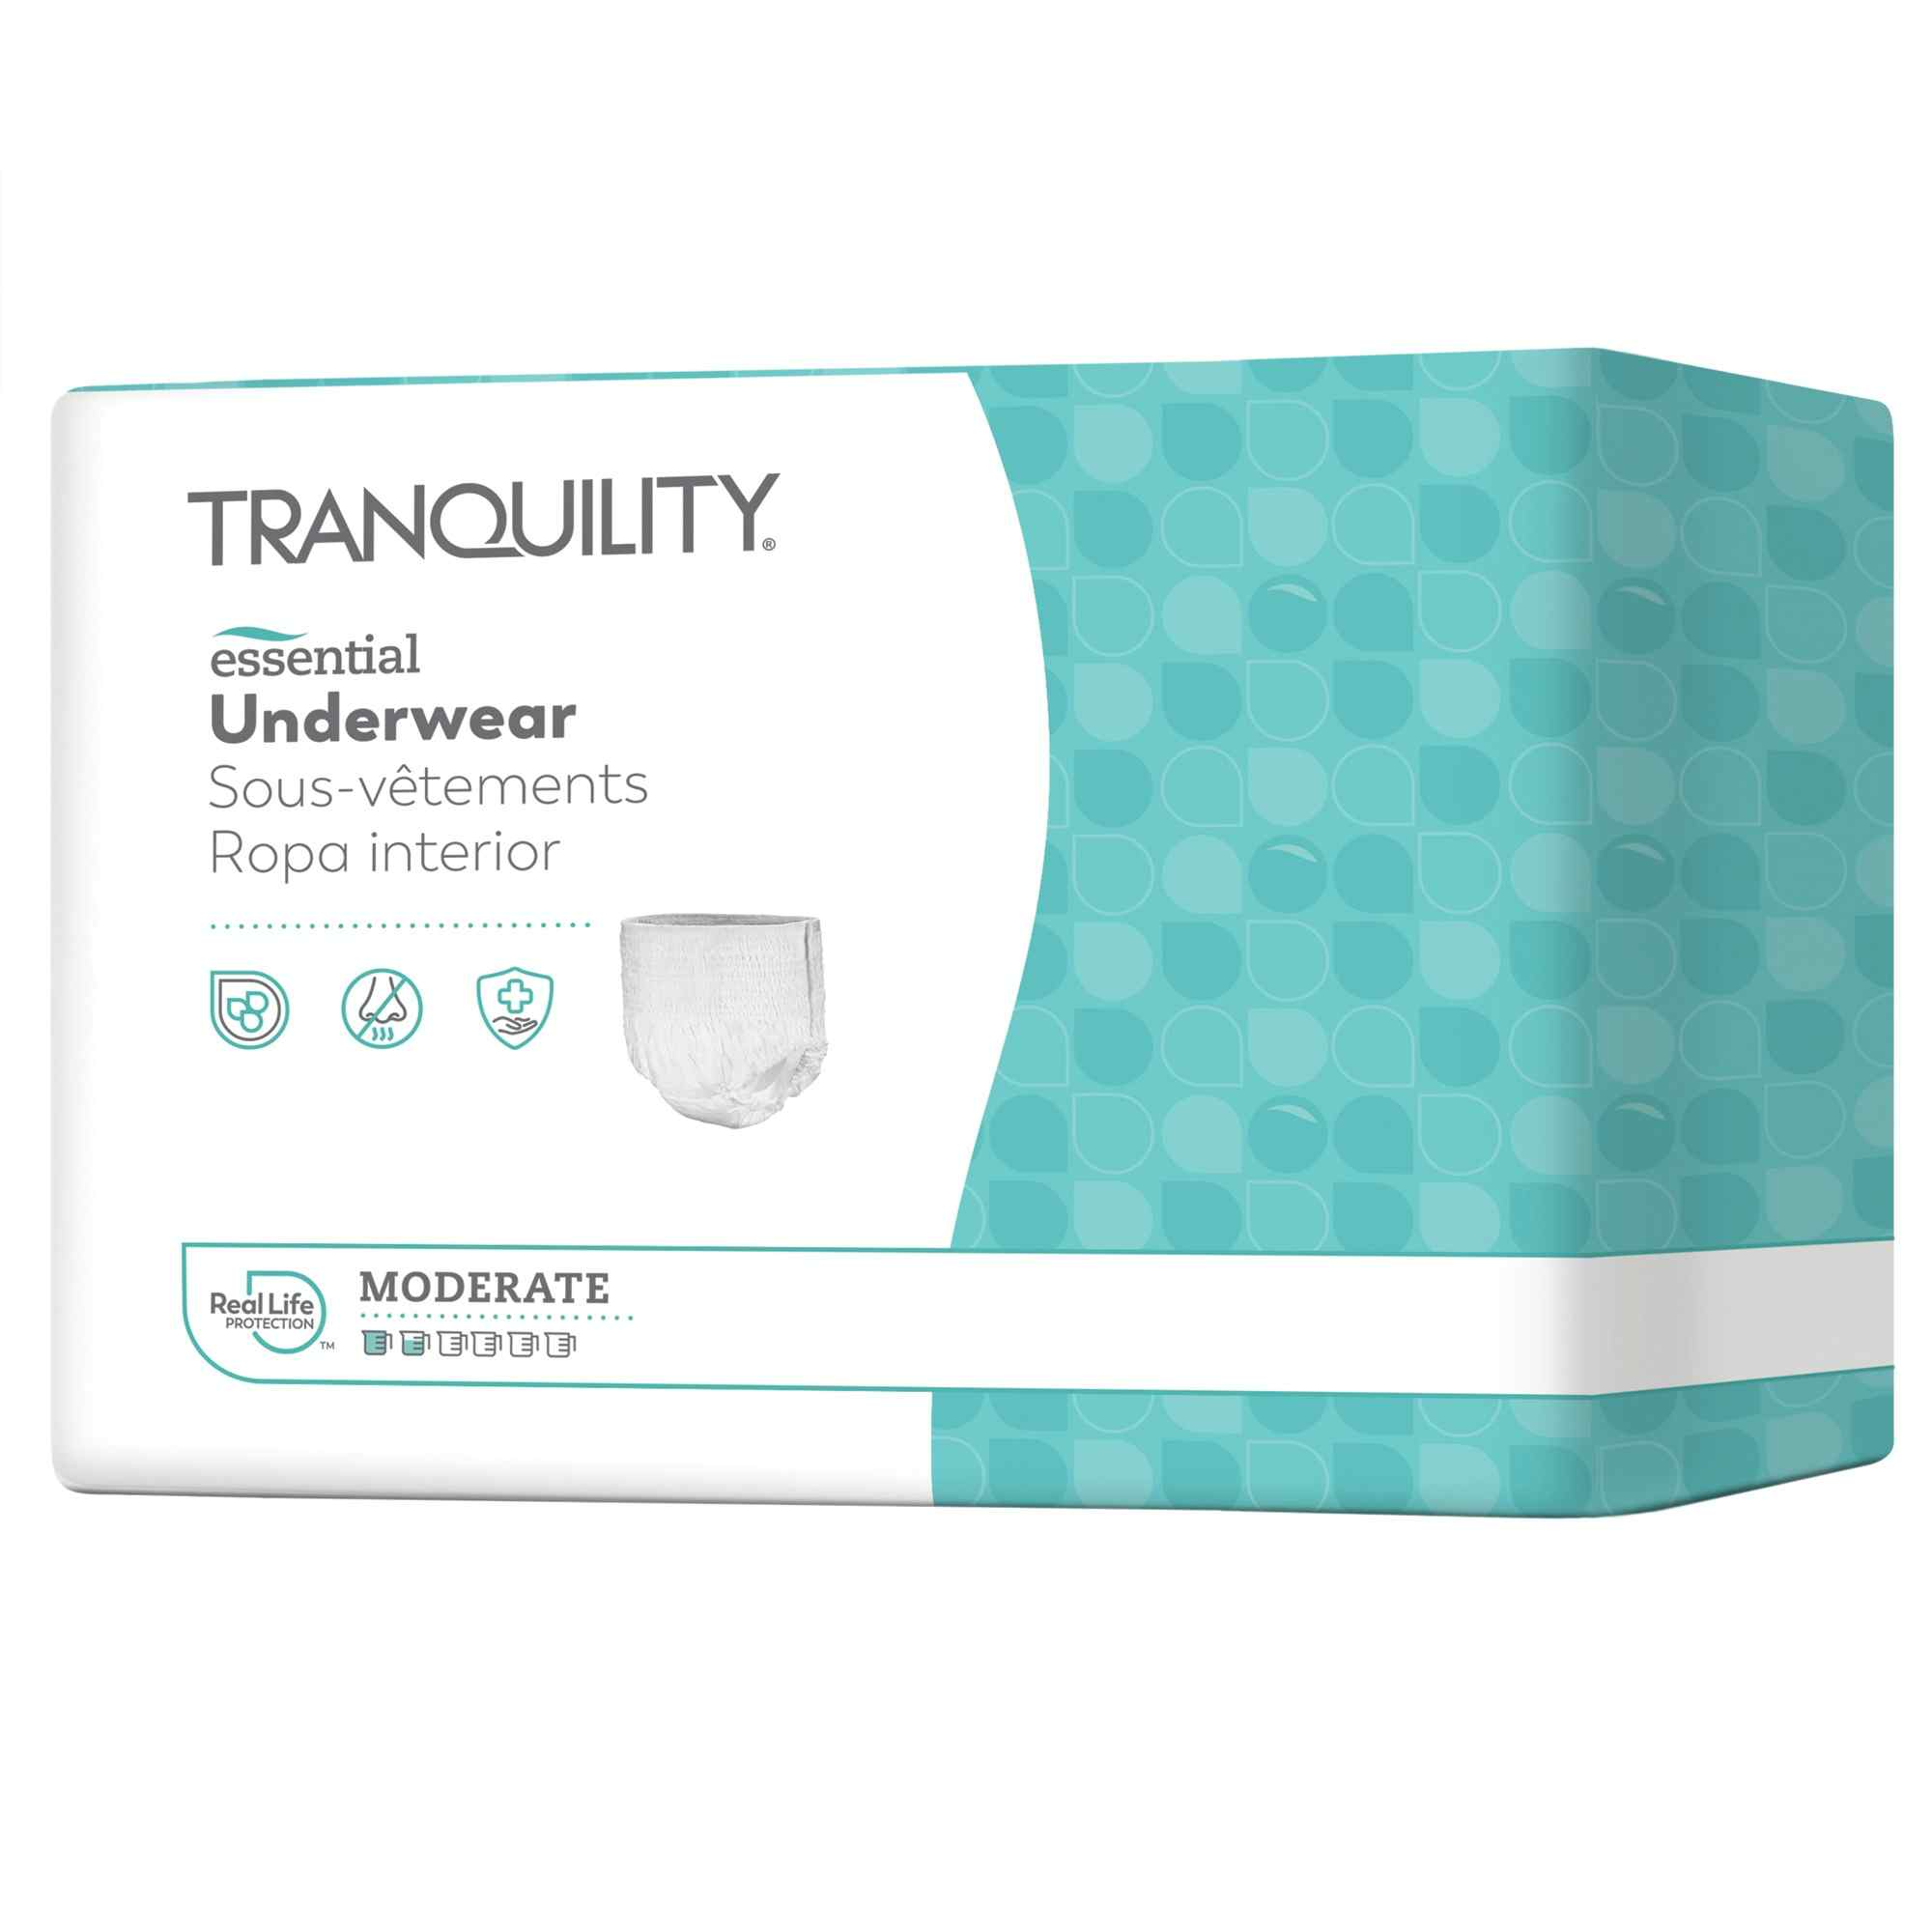 Tranquility Essential Absorbent Underwear, Moderate Absorbency packaging